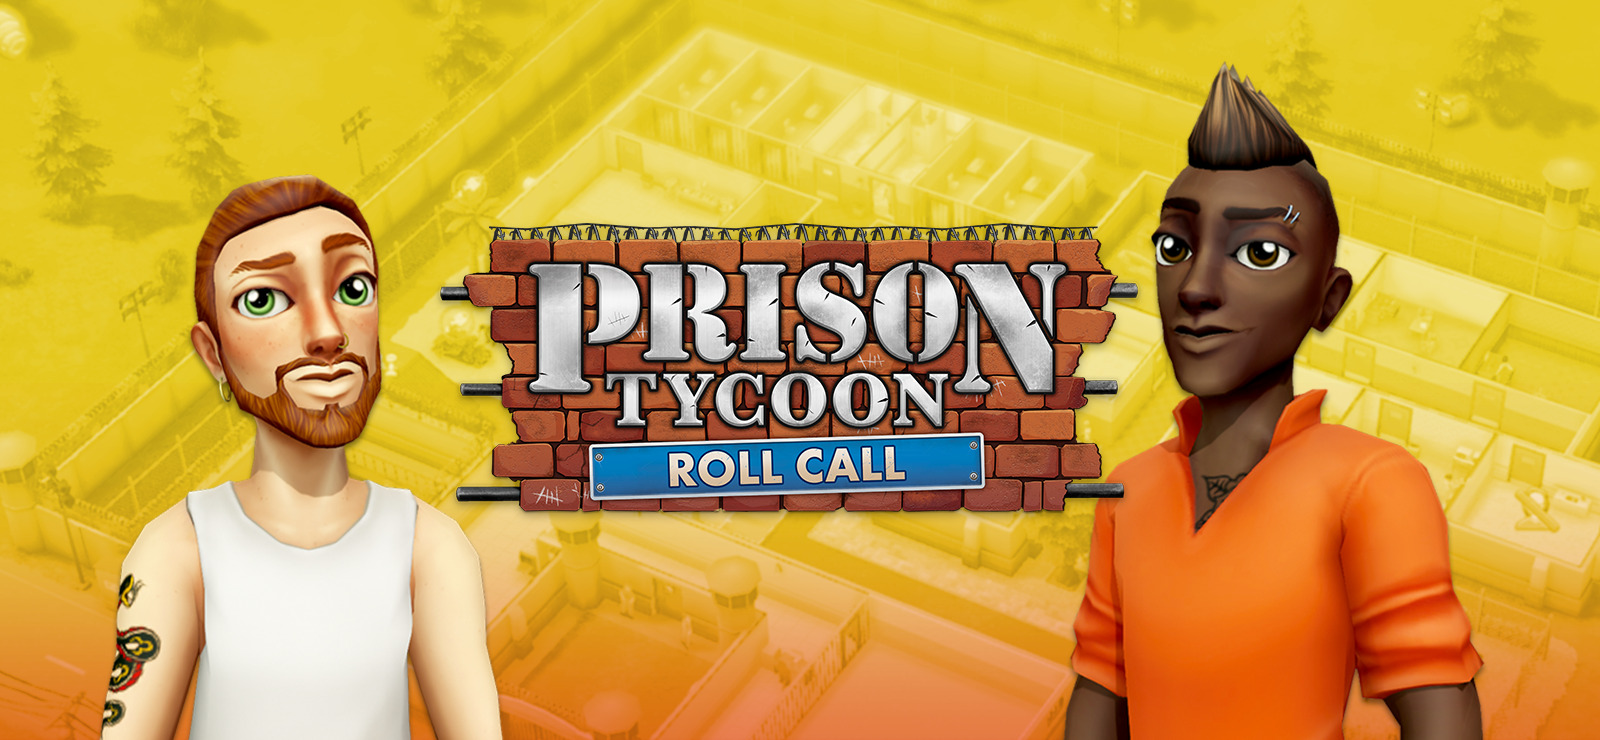 Prison Tycoon: Under New Management - Roll Call on GOG.com